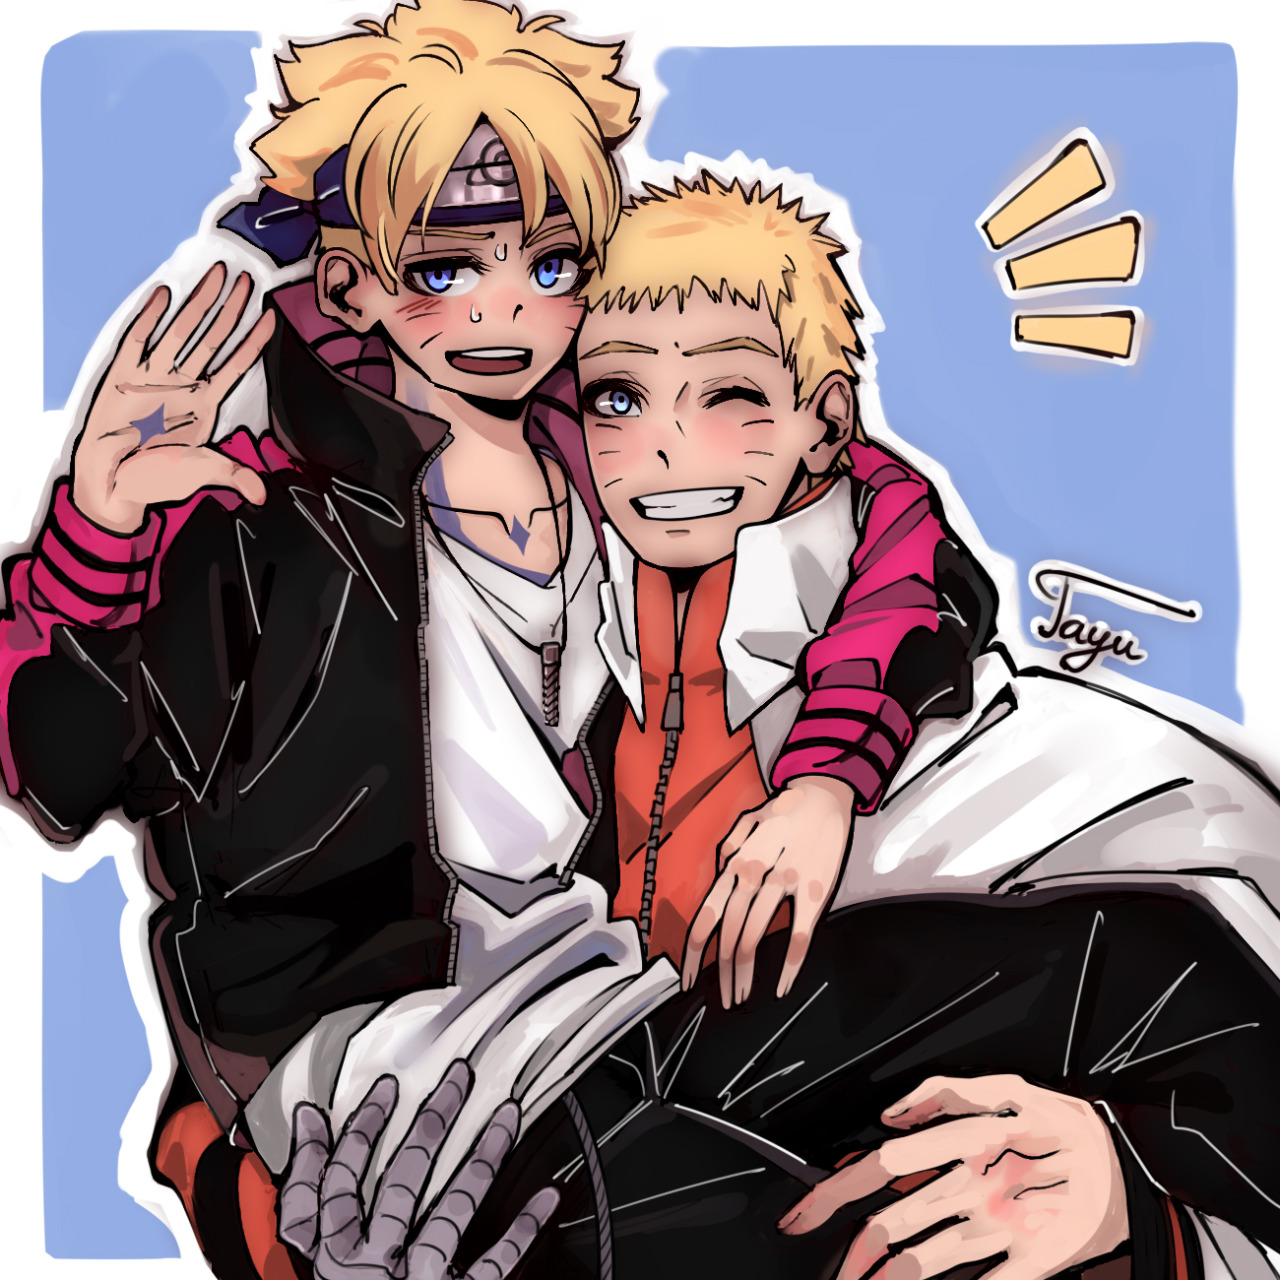 𝓣𝓪𝔂𝓾 — son in the arms of the hokage